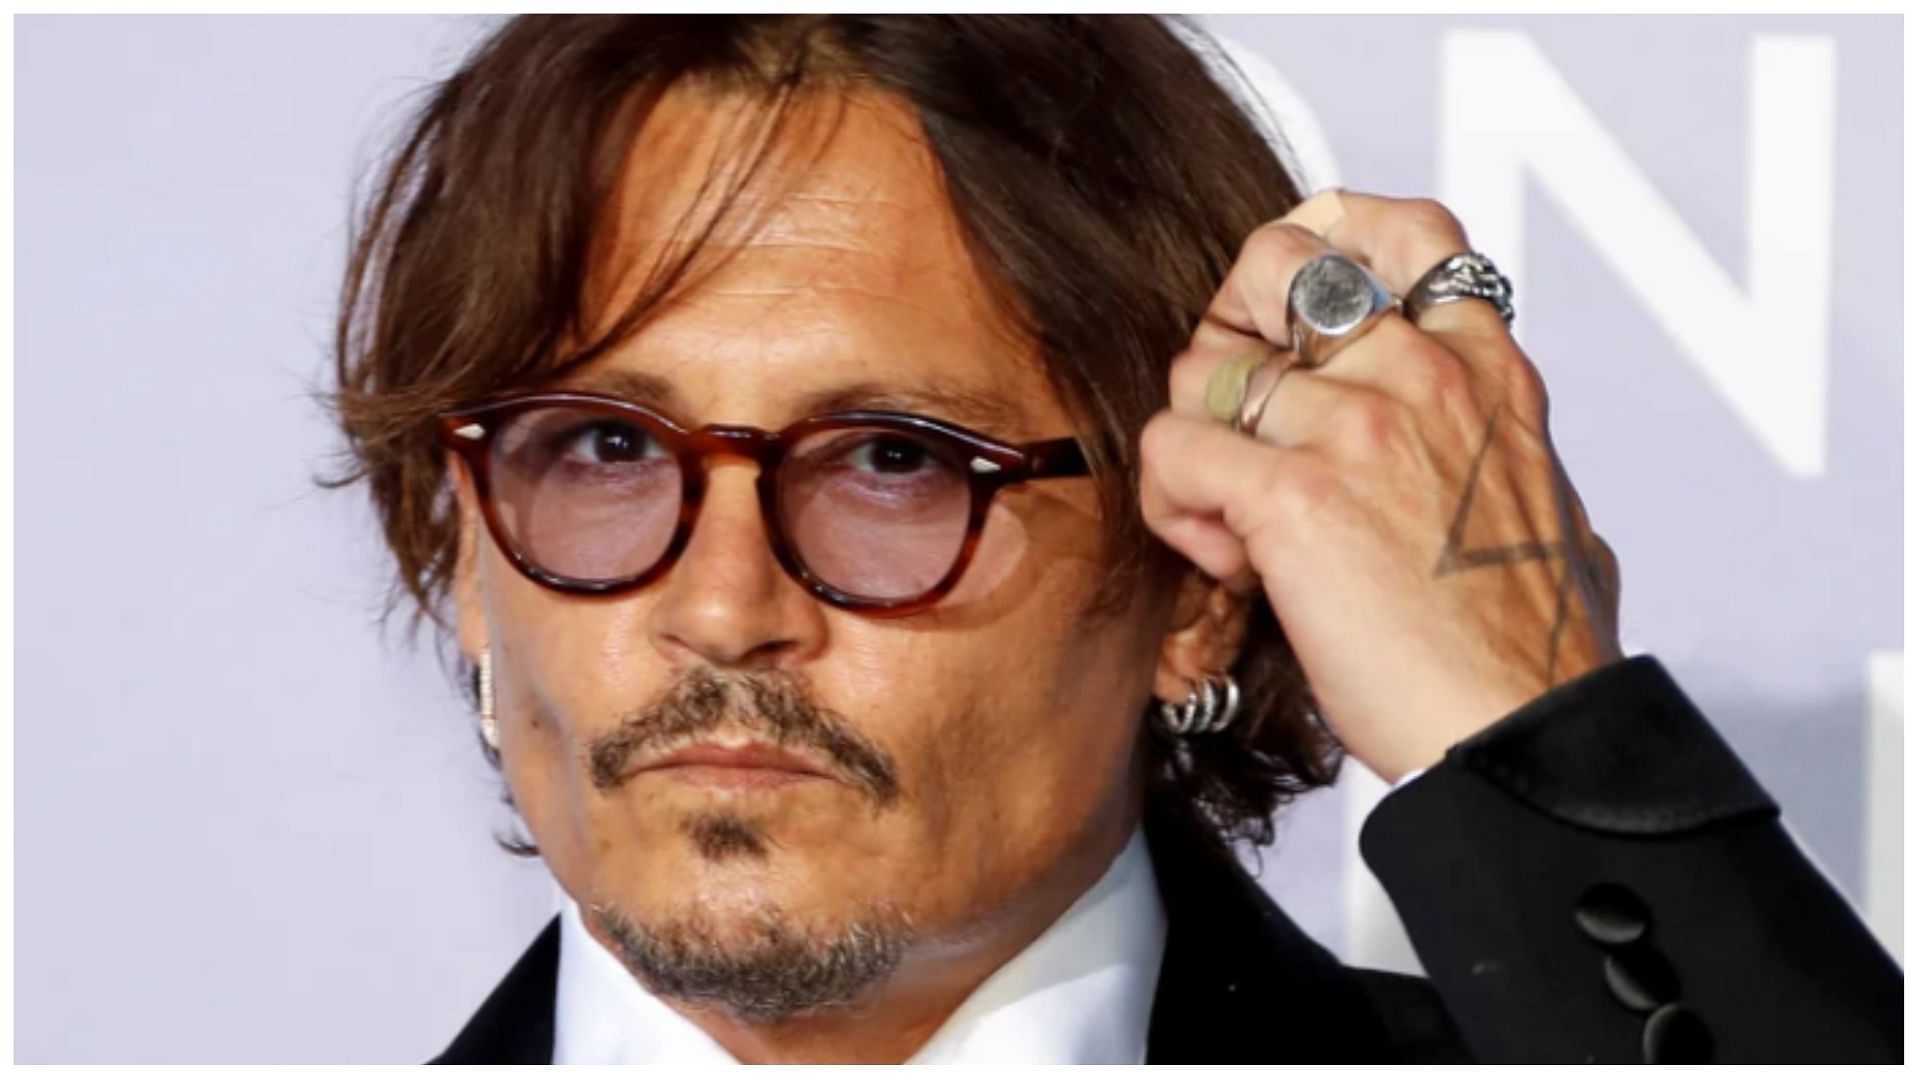 The Johnny Depp Shot can be ordered by men who feel unsafe in the bar (image via EPA/Eric Gaillard)